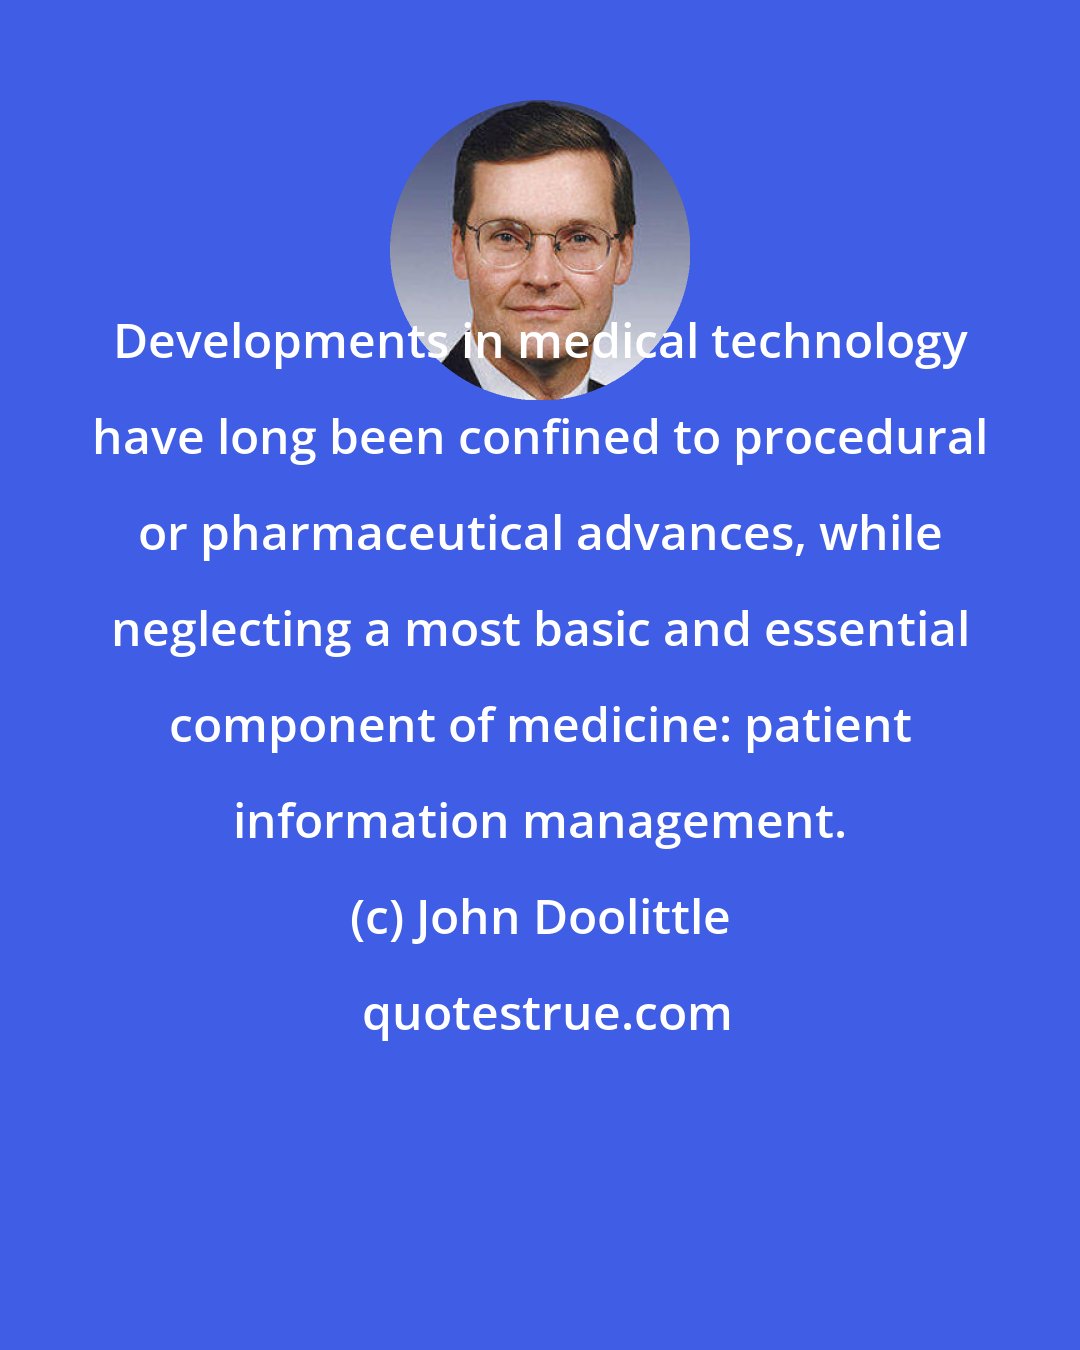 John Doolittle: Developments in medical technology have long been confined to procedural or pharmaceutical advances, while neglecting a most basic and essential component of medicine: patient information management.